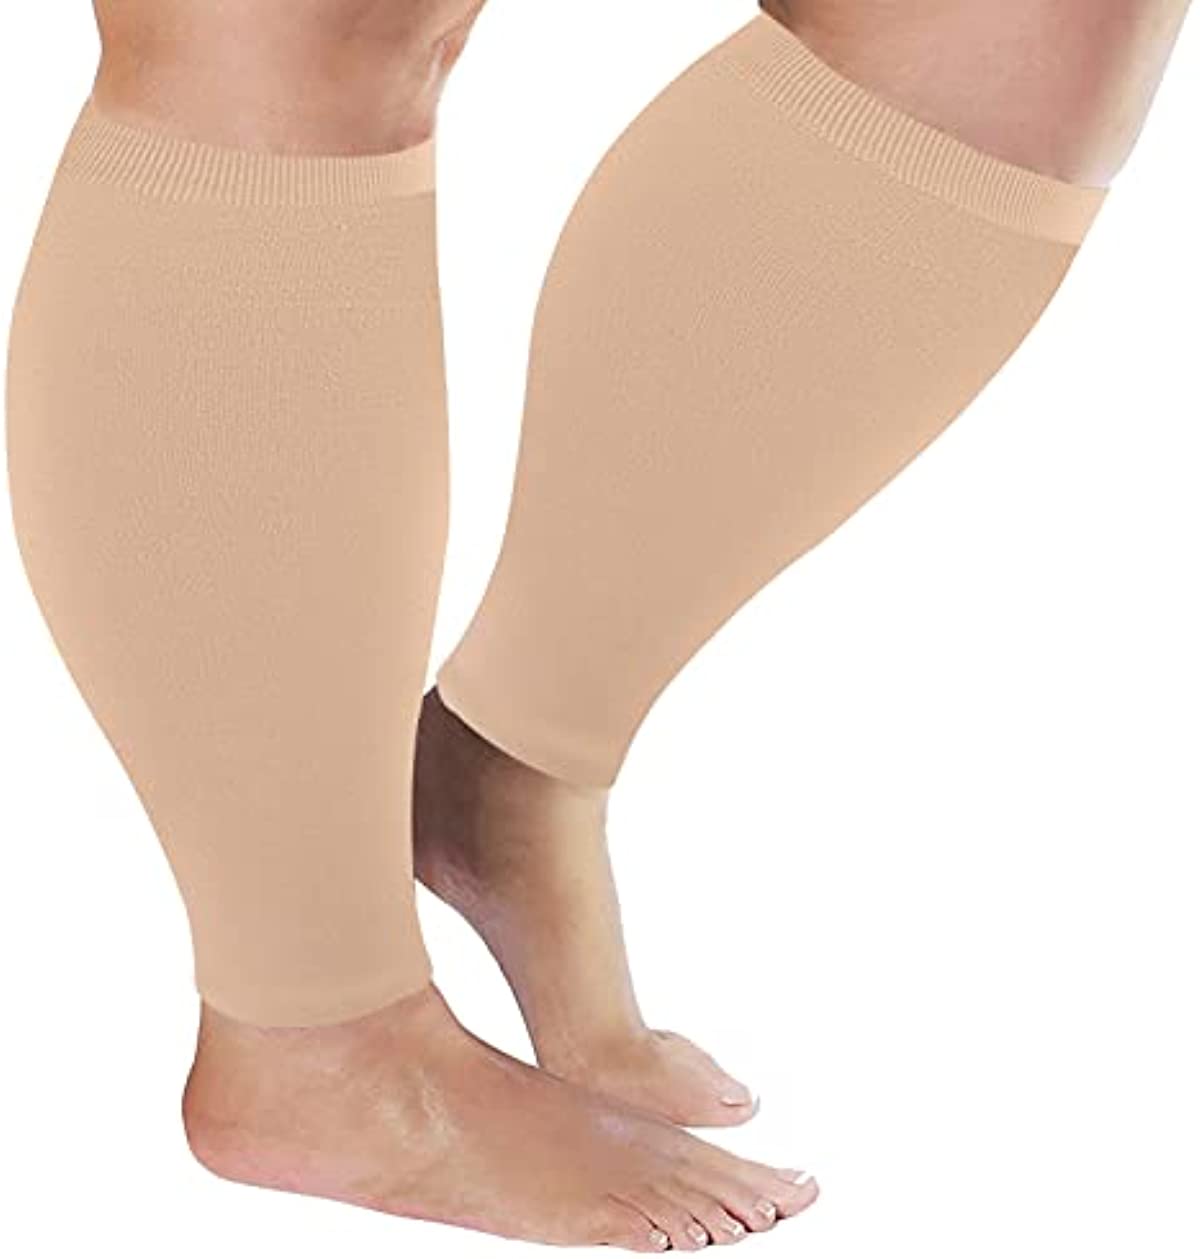 Plus Size Compression Sleeves for Calves Women Wide Calf Compression Legs Sleeves Men 5XL, Relieve Varicose Veins, Edema, Swelling, Soreness, Shin splints, for Work, Travel, Sports and Daily Wear